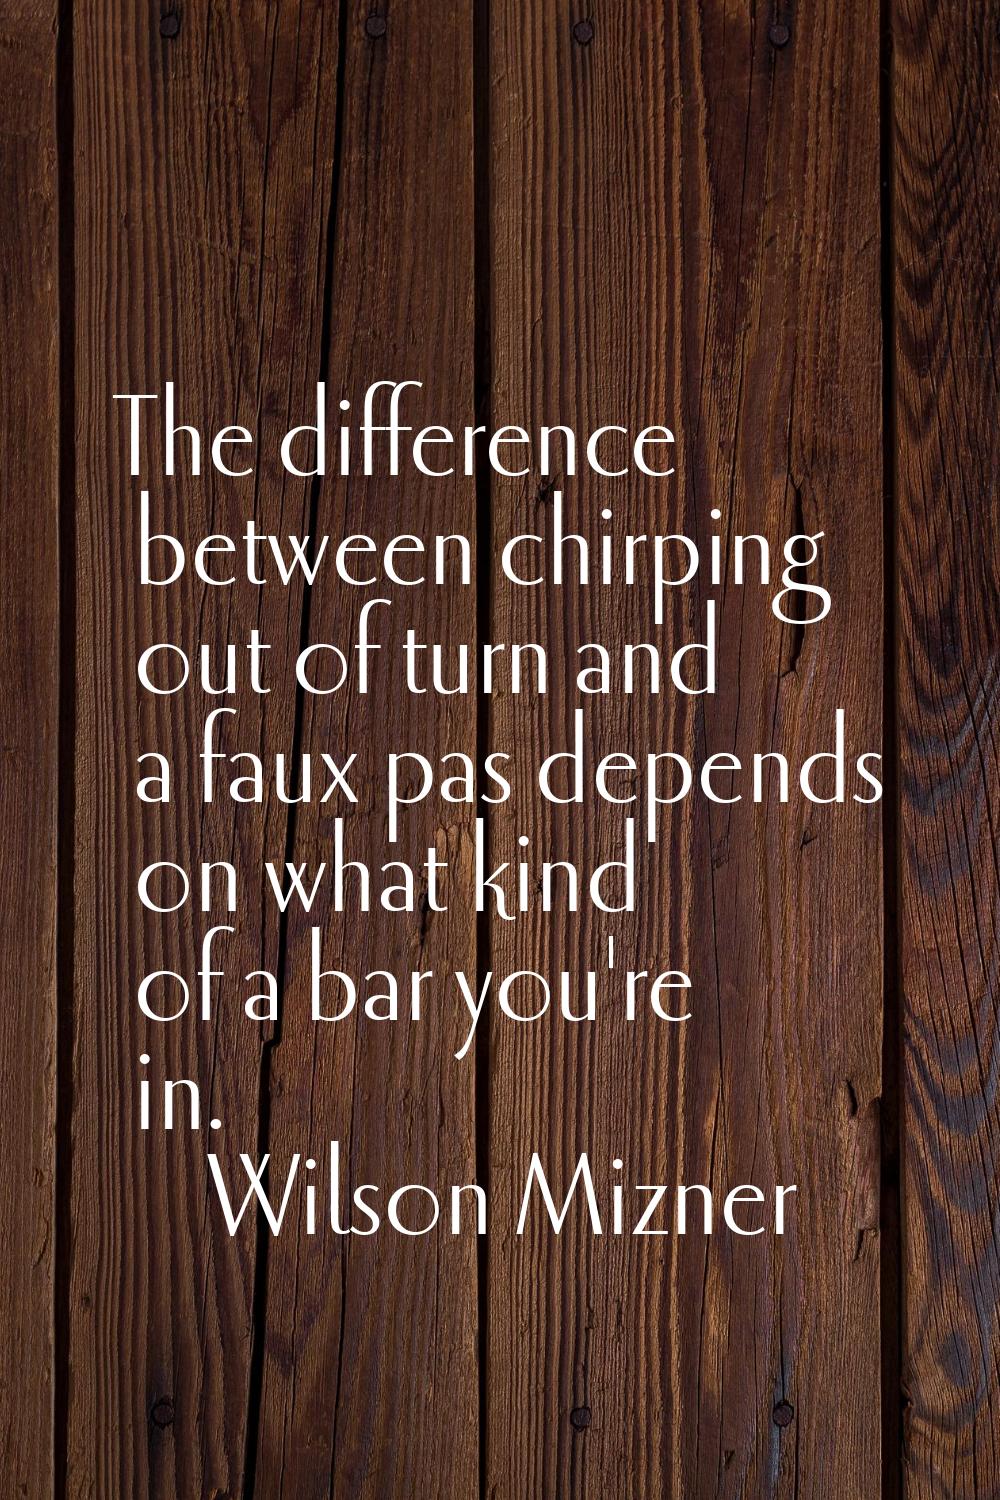 The difference between chirping out of turn and a faux pas depends on what kind of a bar you're in.